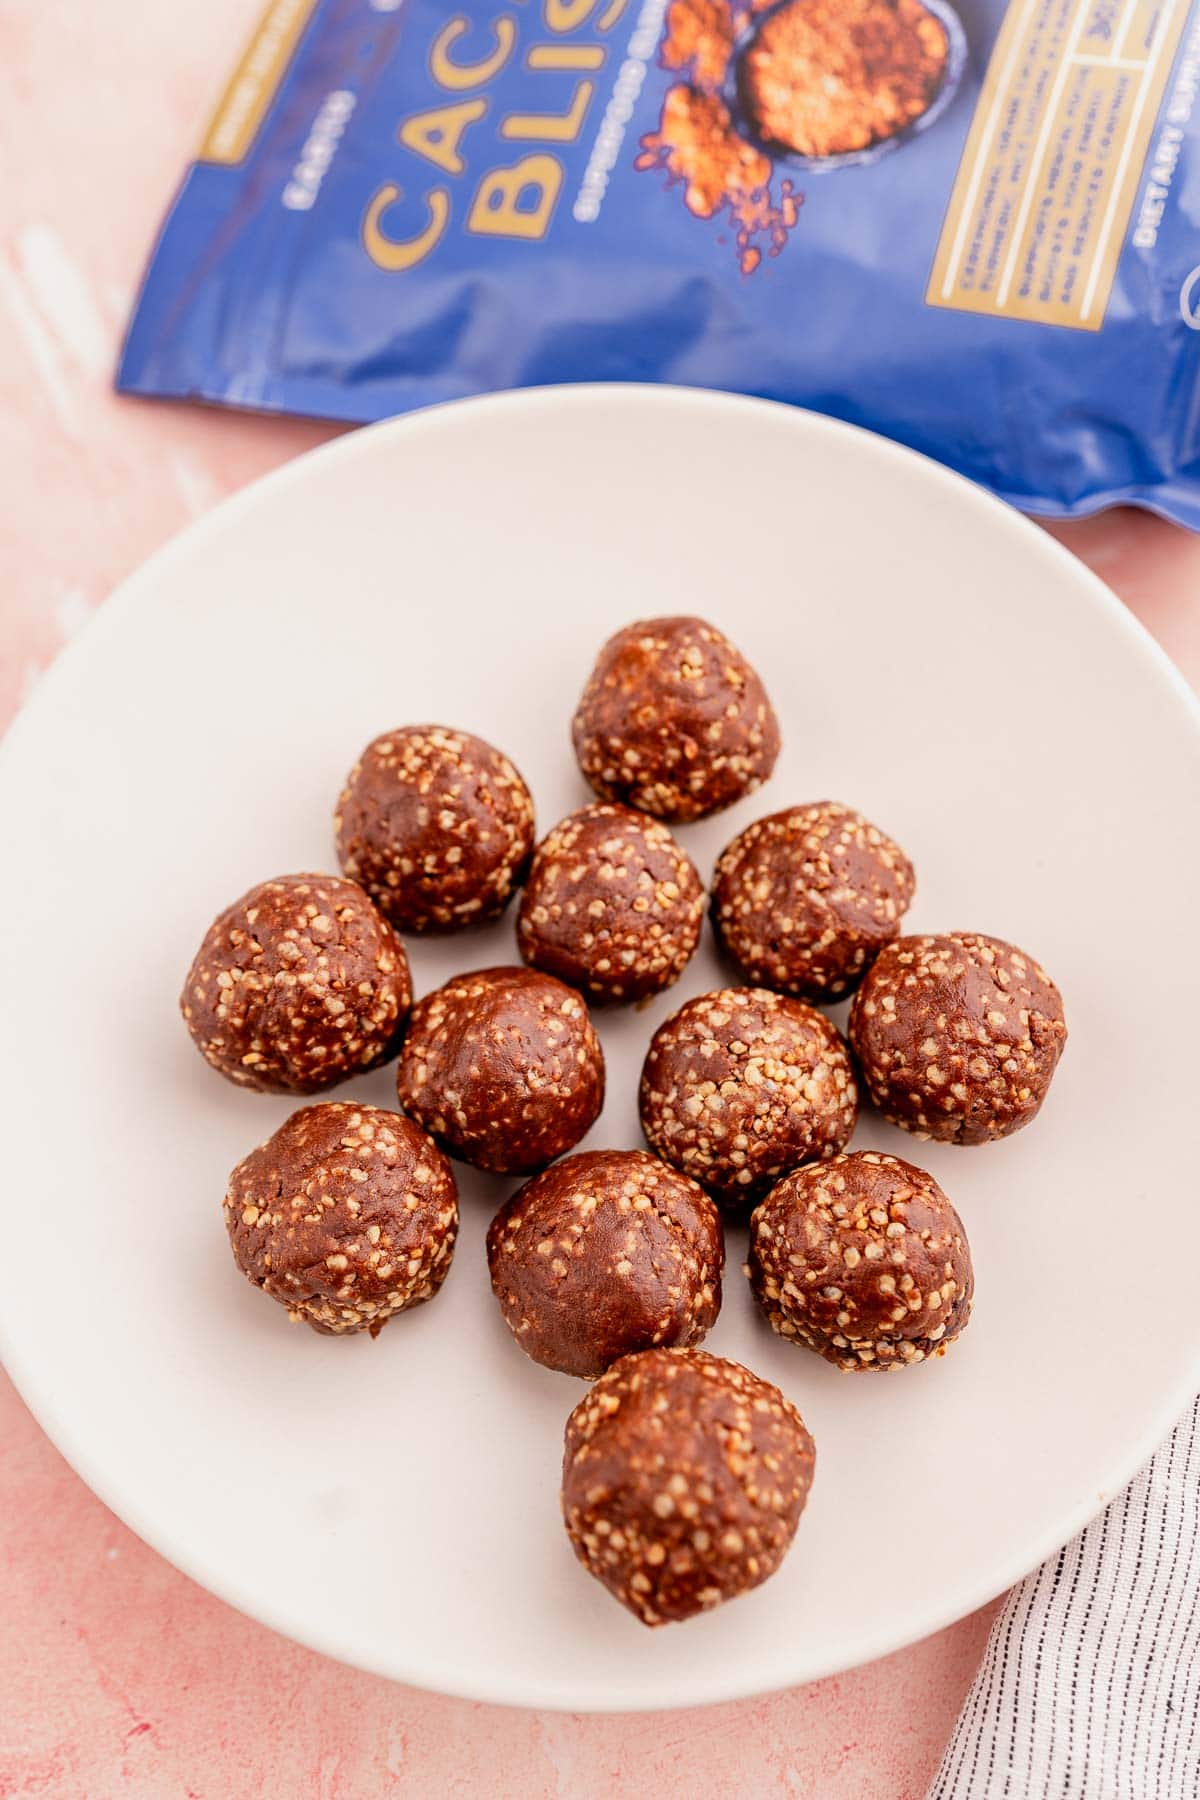 Quinoa crunch bites arranged on a white plate, with a bag of cacao nibs partially visible in the background.